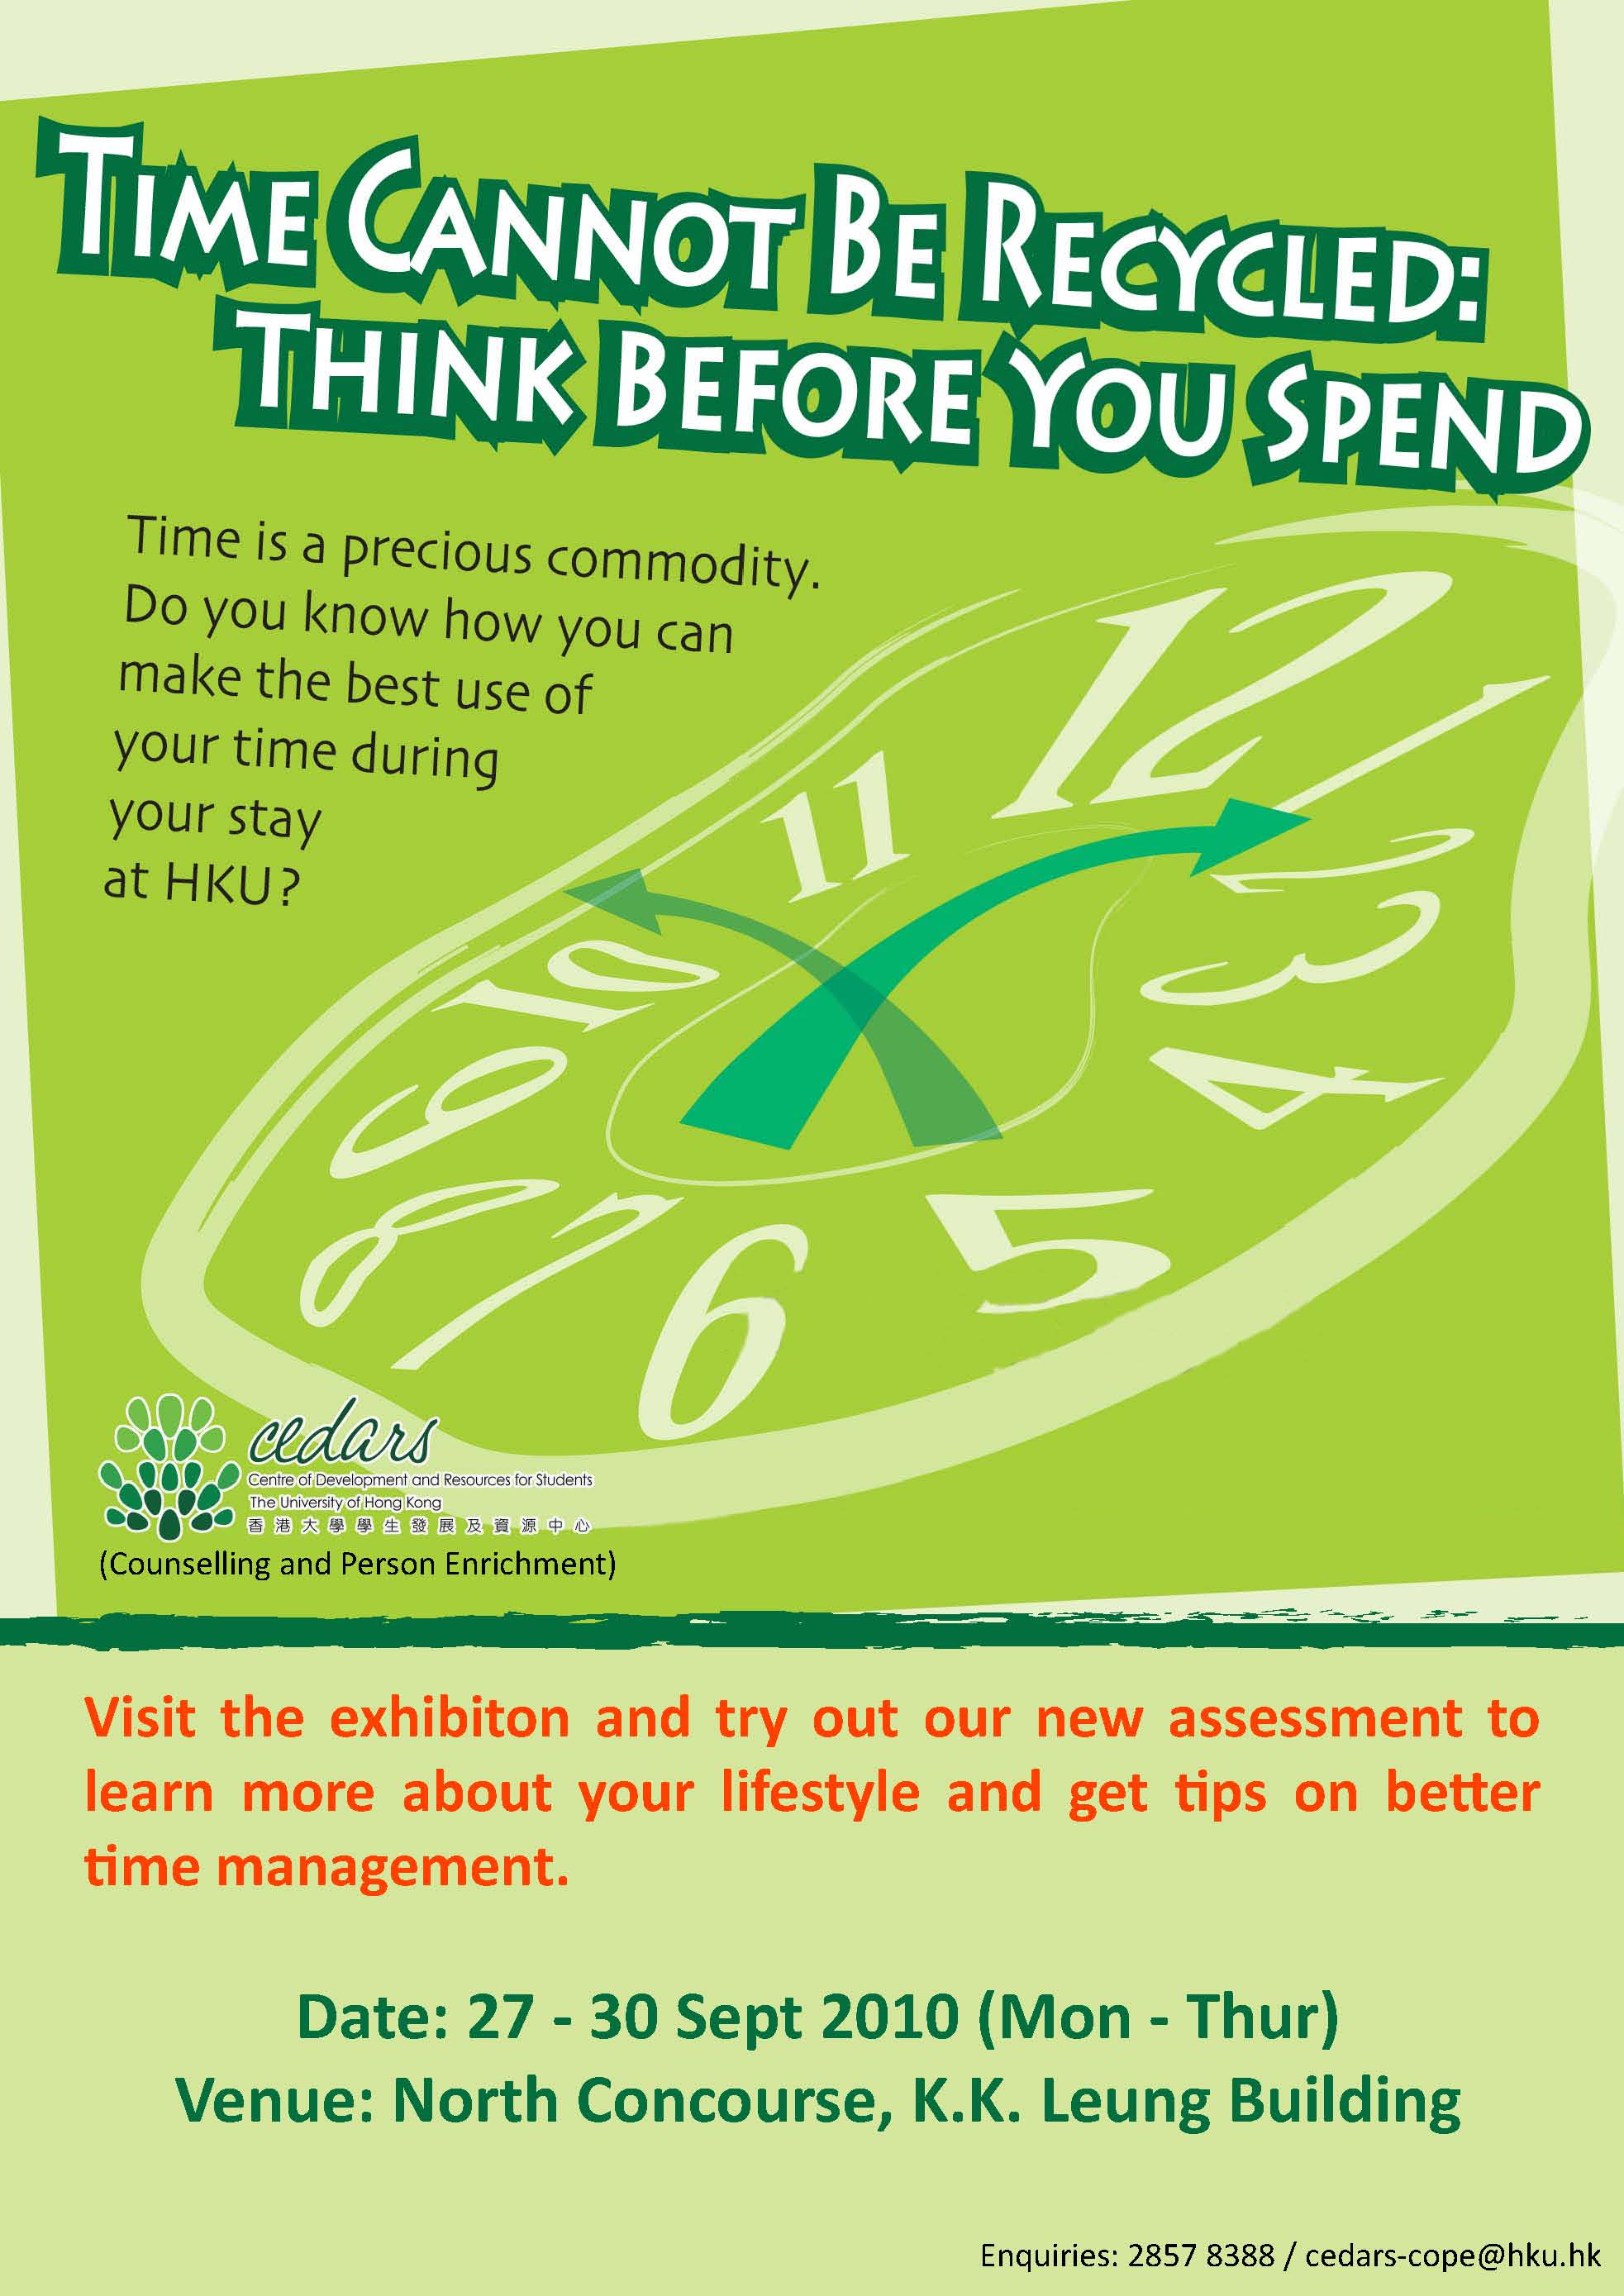 Time Cannot Be Recycled: Think Before You Spend